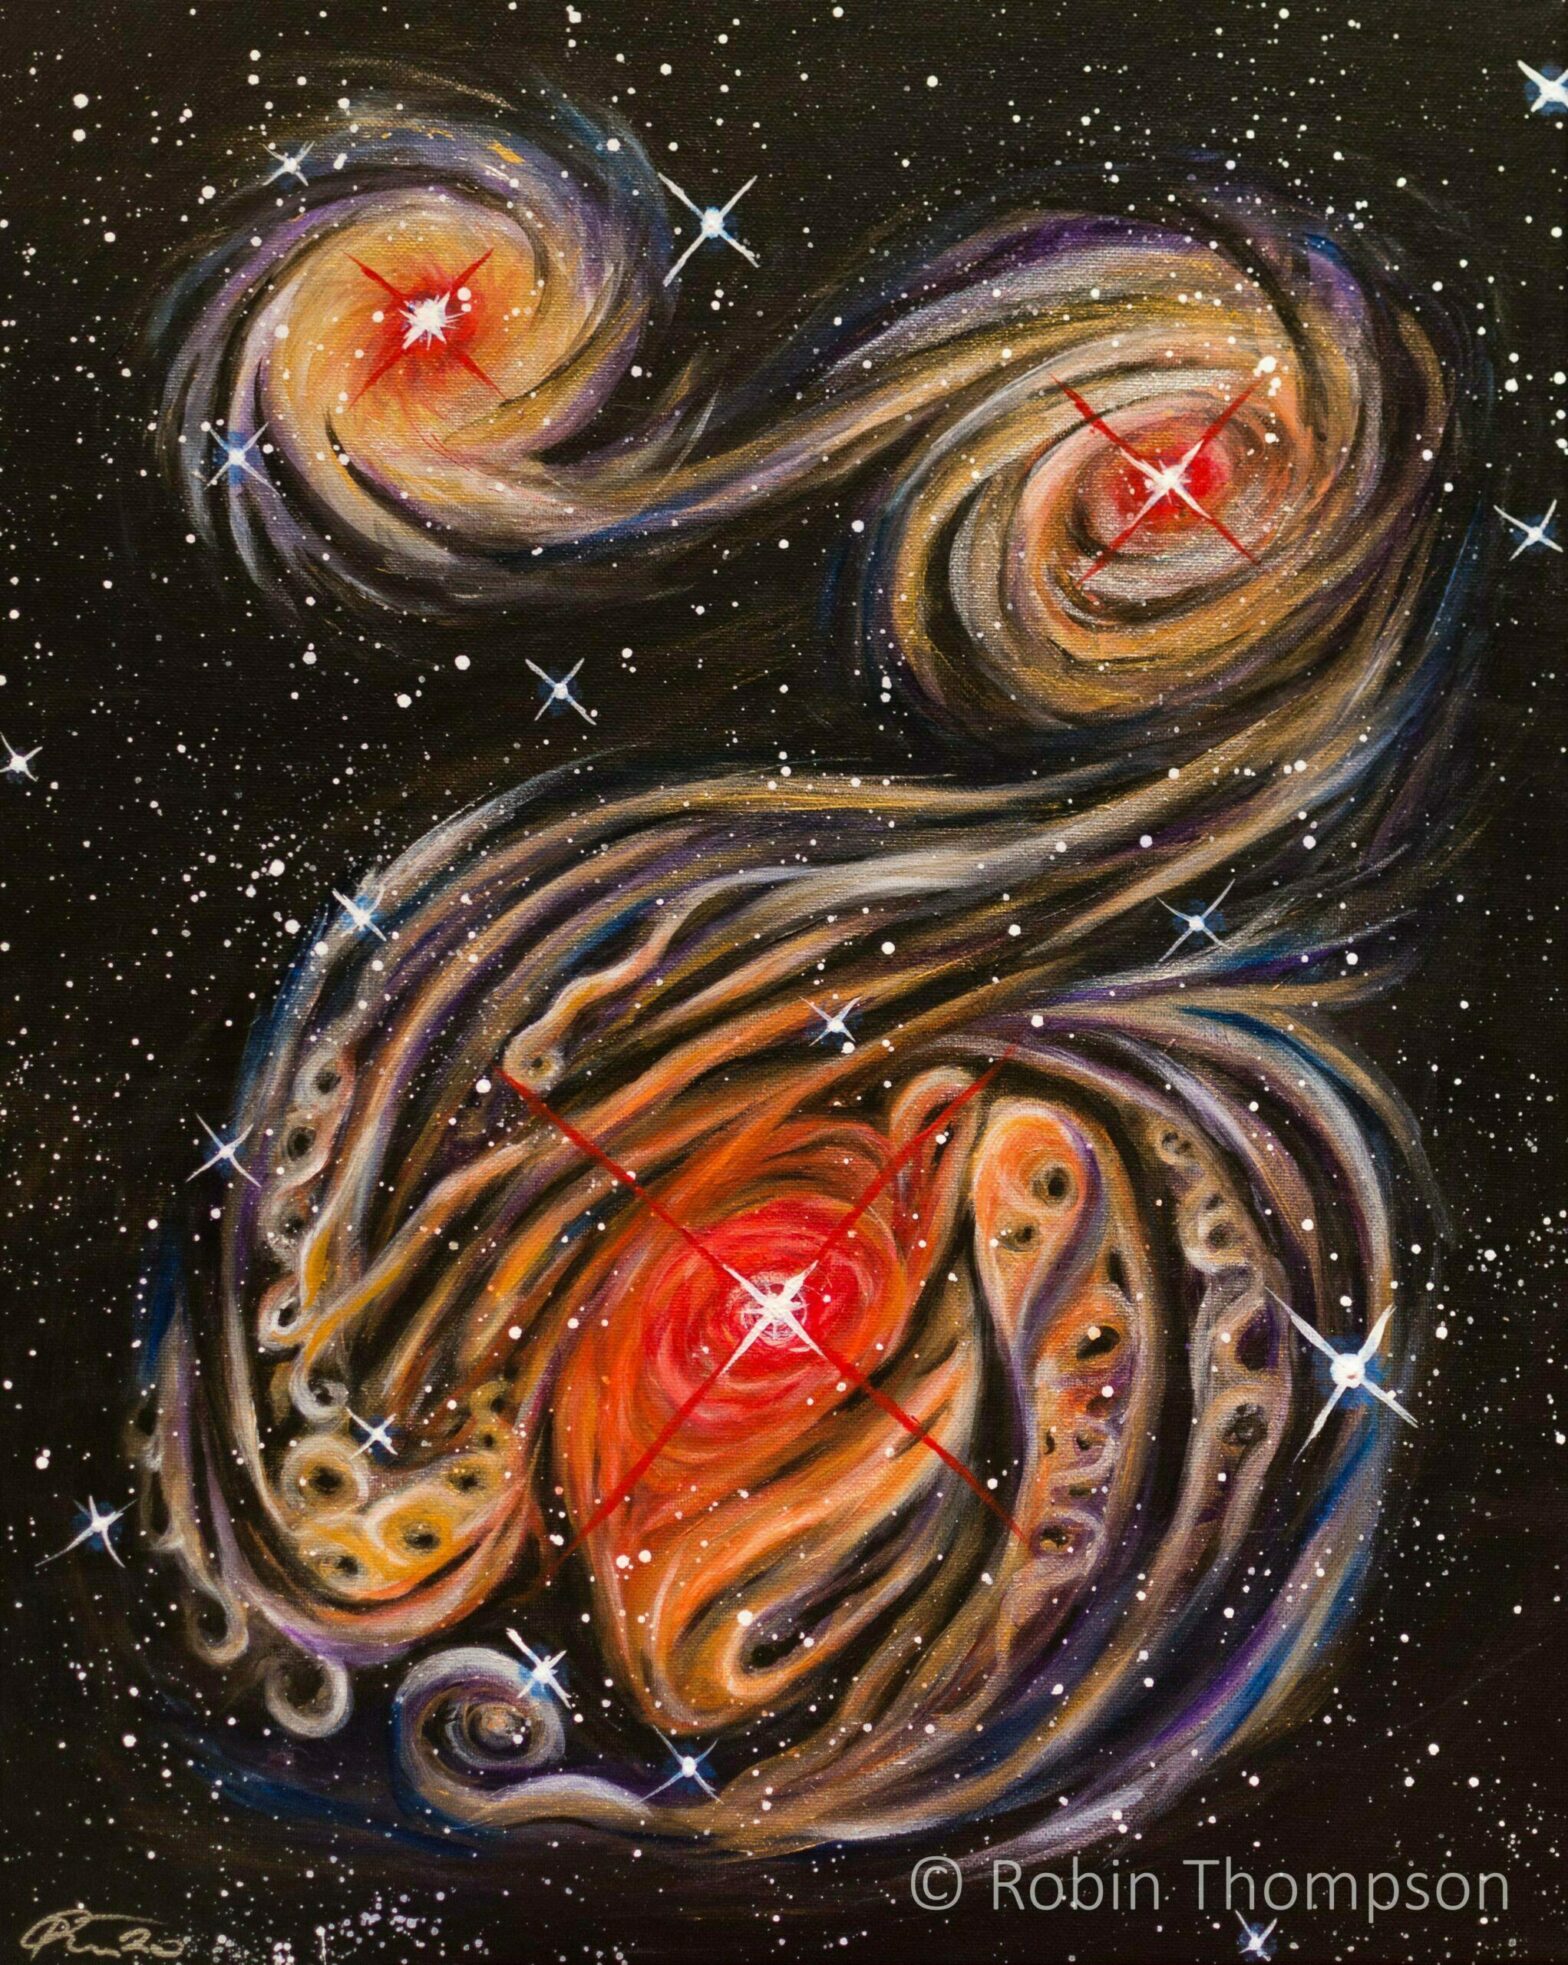 An acrylic painting of three galaxies colliding together. The bottom galaxy is the largest and is painted in a stylised manner, with many swirls throughout. The centre of each galaxy is bright red, and gold and silver paints dominate the rest of the forms, along with blues and oranges.